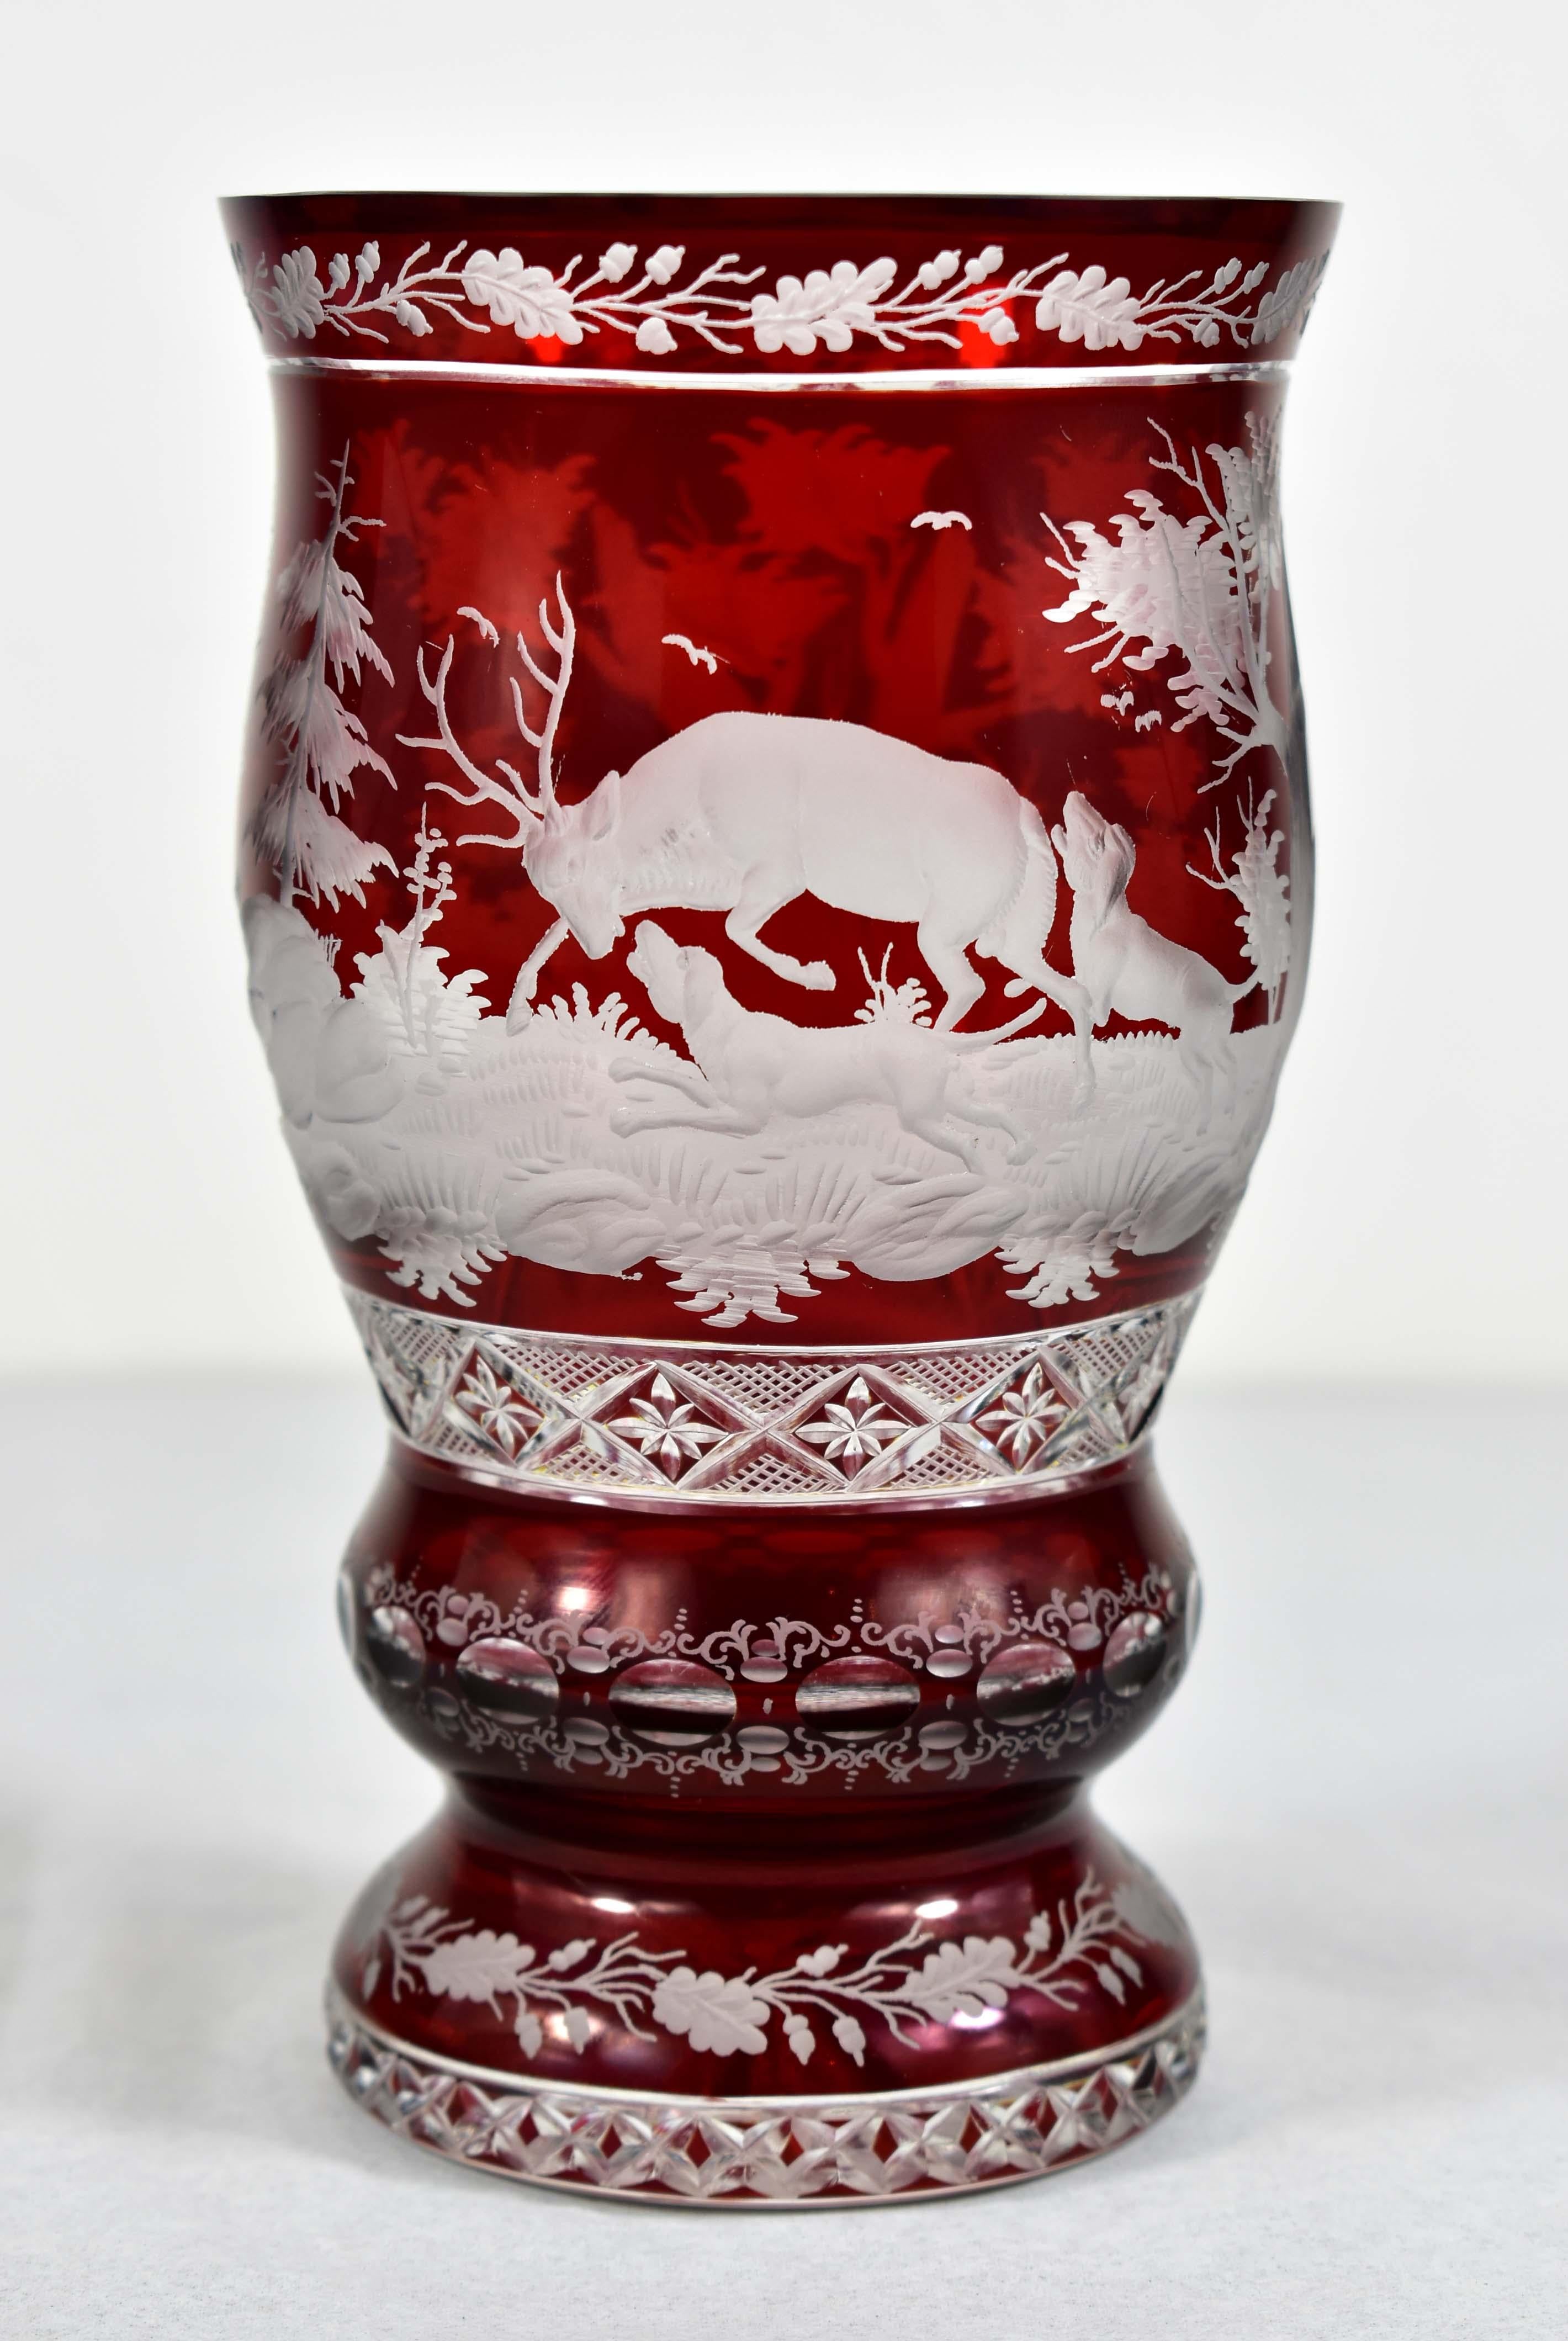 A beautiful cut, engraved and painted goblet made of clear glass with a red lazure. The engraving is a hunting motif of a deer defending against an attack by dogs. In the background is a fleeing hare. Everything is complemented by a beautiful cuting